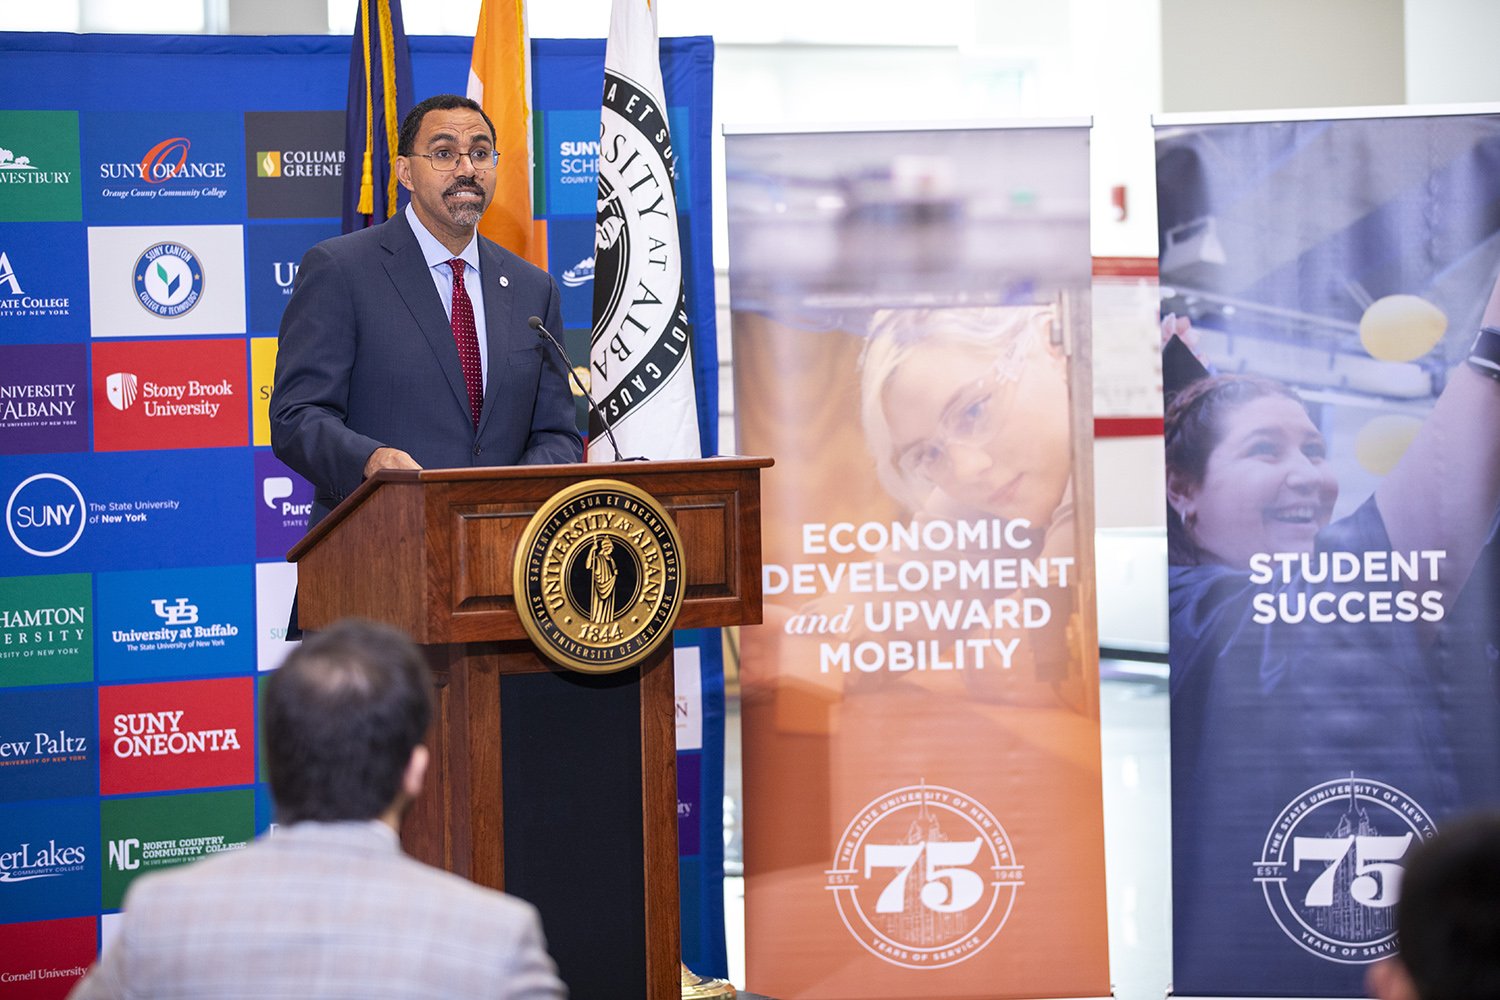 Chancellor John King speaks at the SUNY AI Symposium on Oct. 16 at ETEC. (Photo by Patrick Dodson)